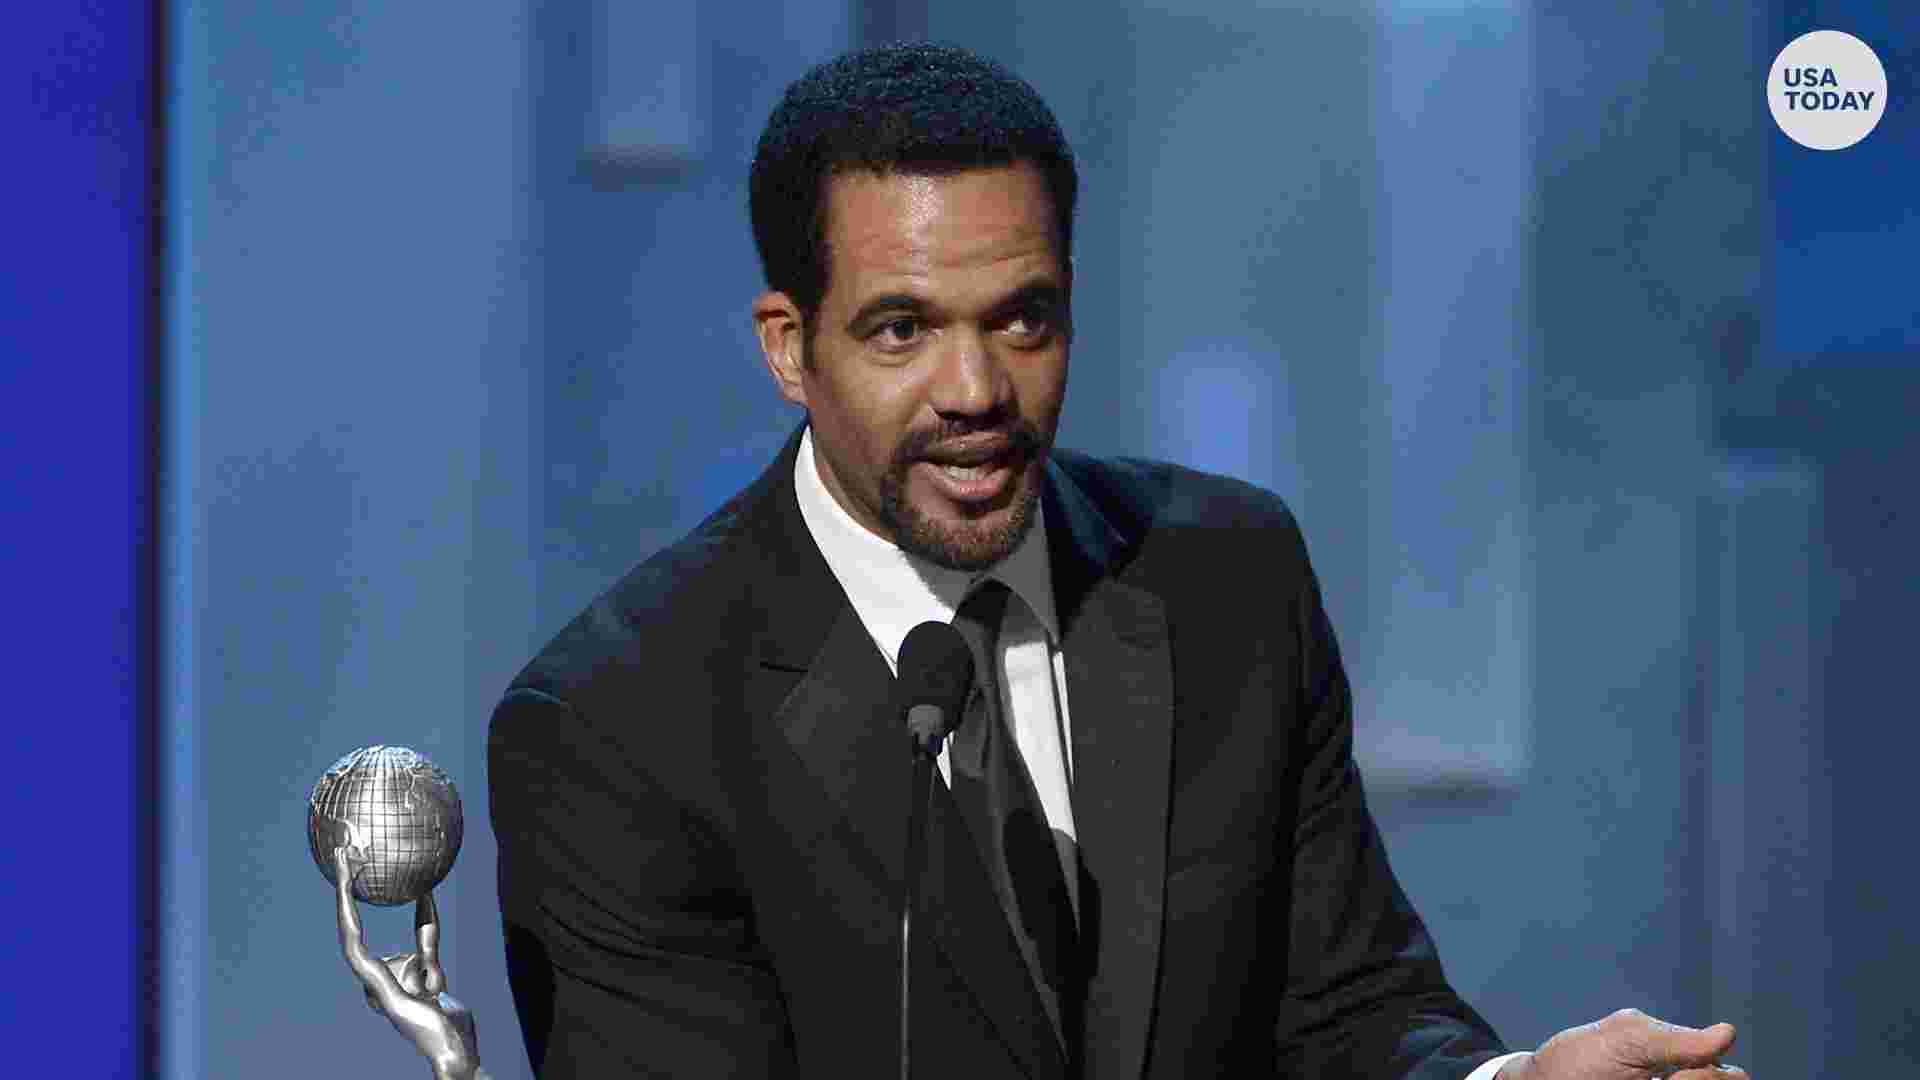 Kristoff St John S Last Y R Airs Wednesday Show Honors Him Friday